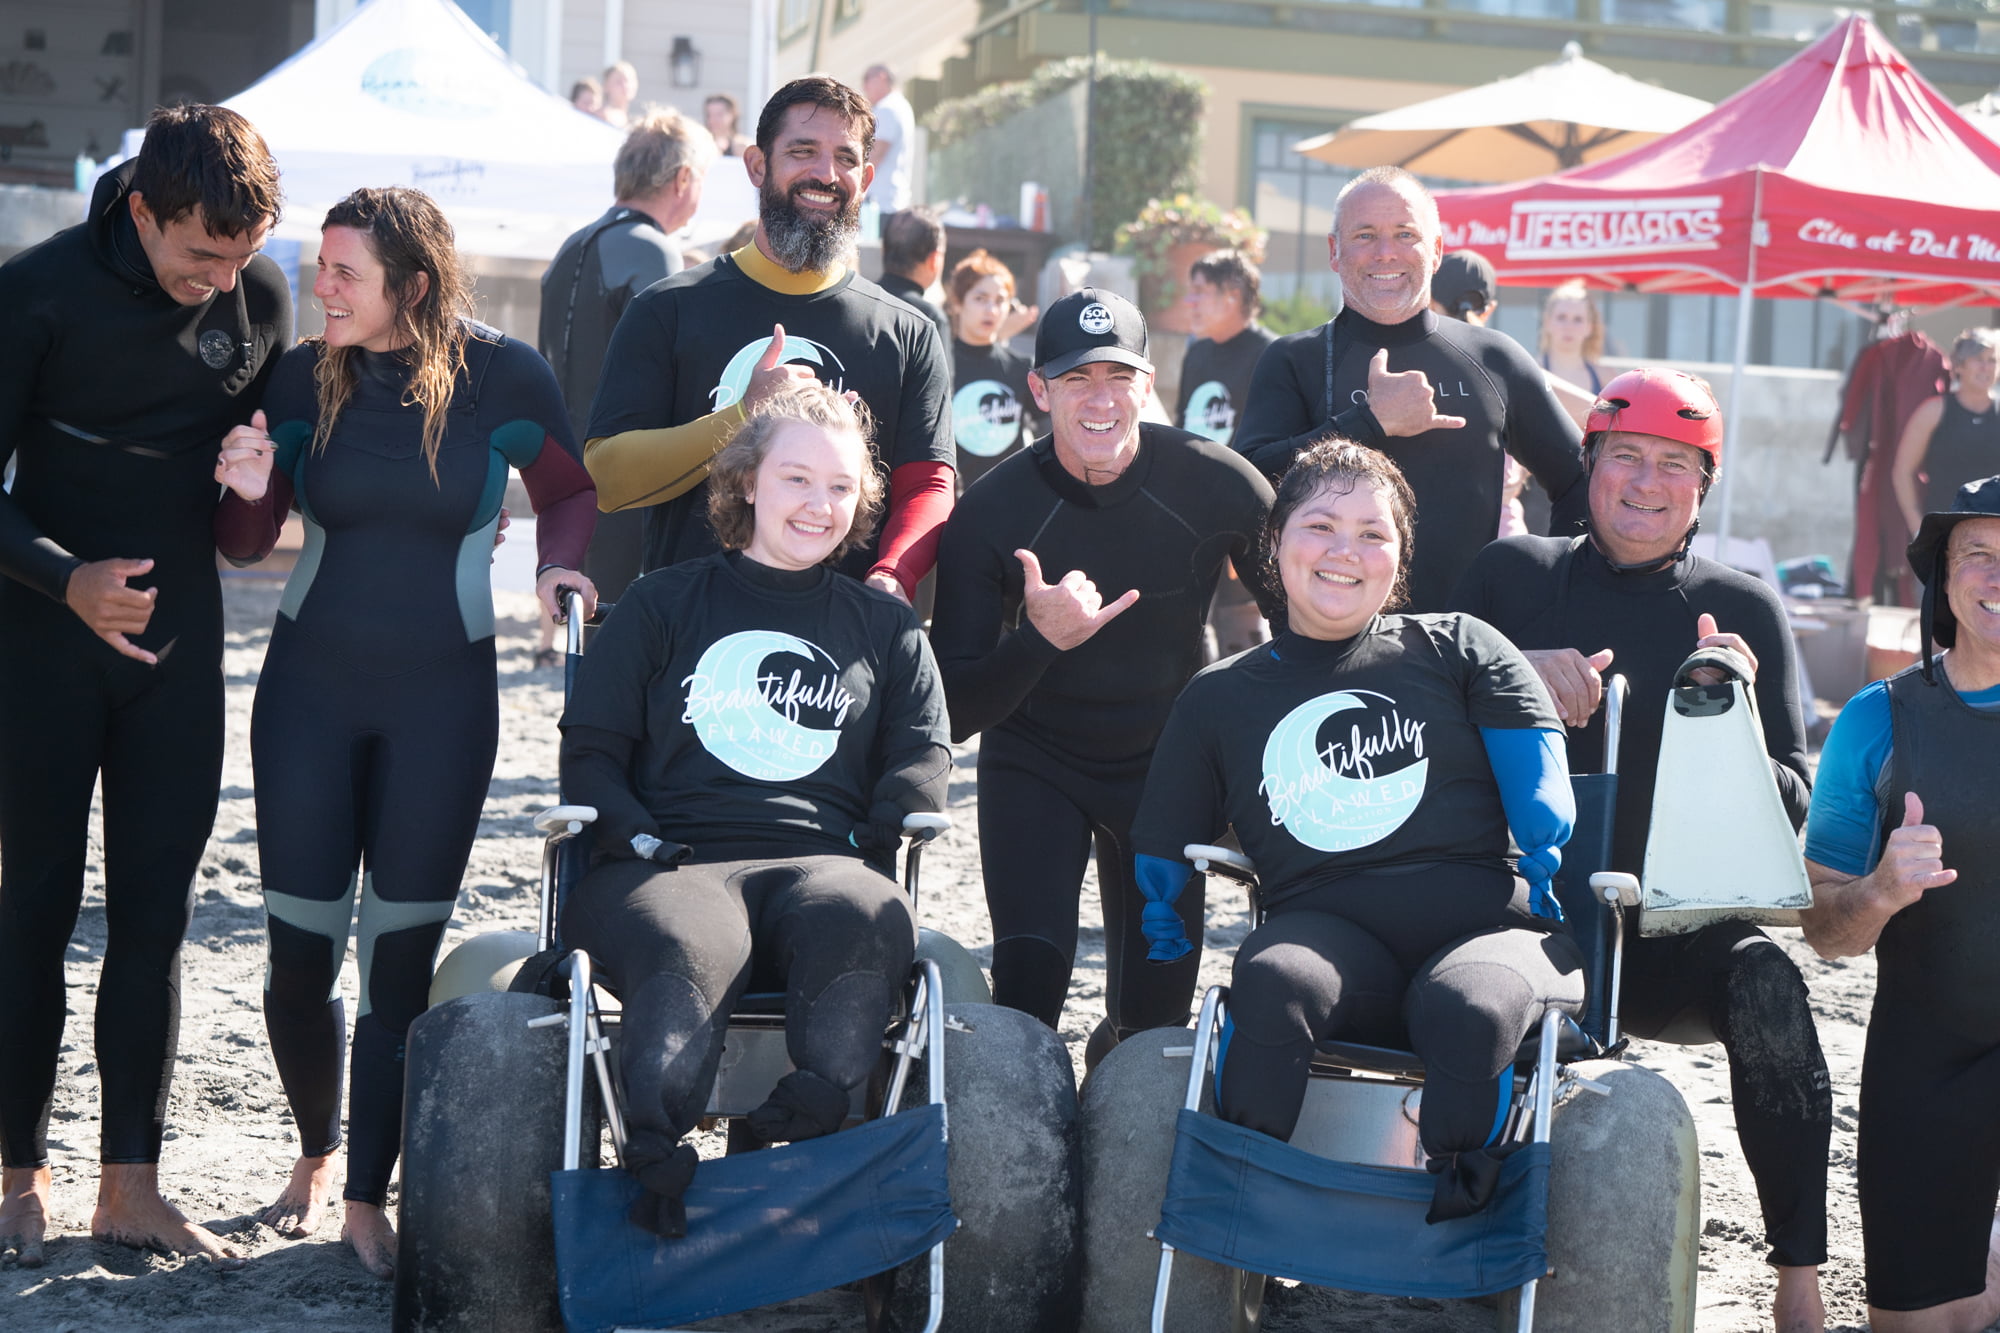 Two young women quad amputees smile and give shakas with their instructors before they get into the ocean to learn how to surf.